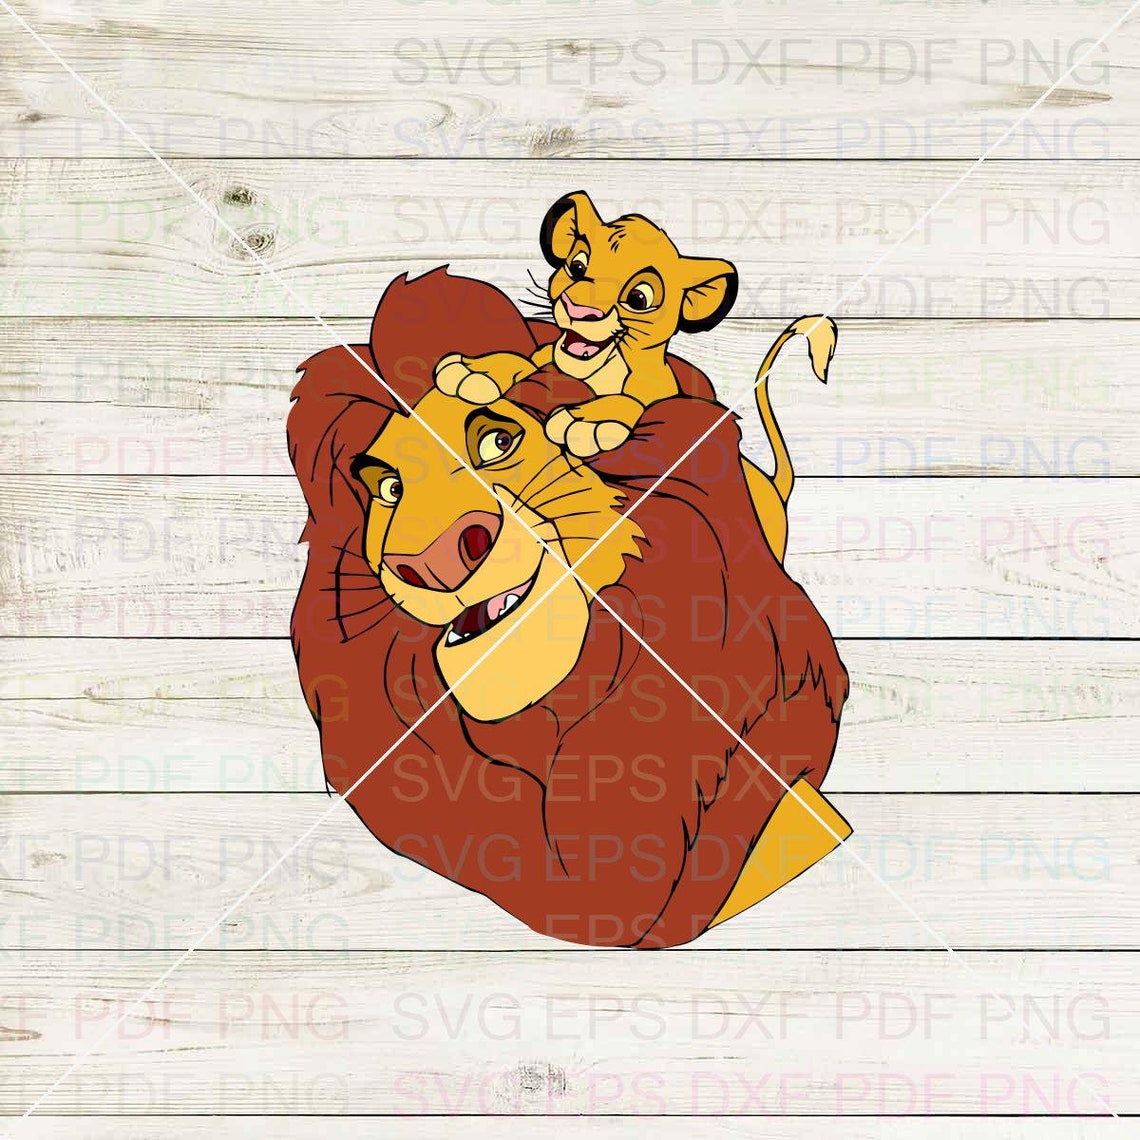 Mufasa And Simba The Lion King 007 Svg Dxf Eps Pdf Png | Etsy